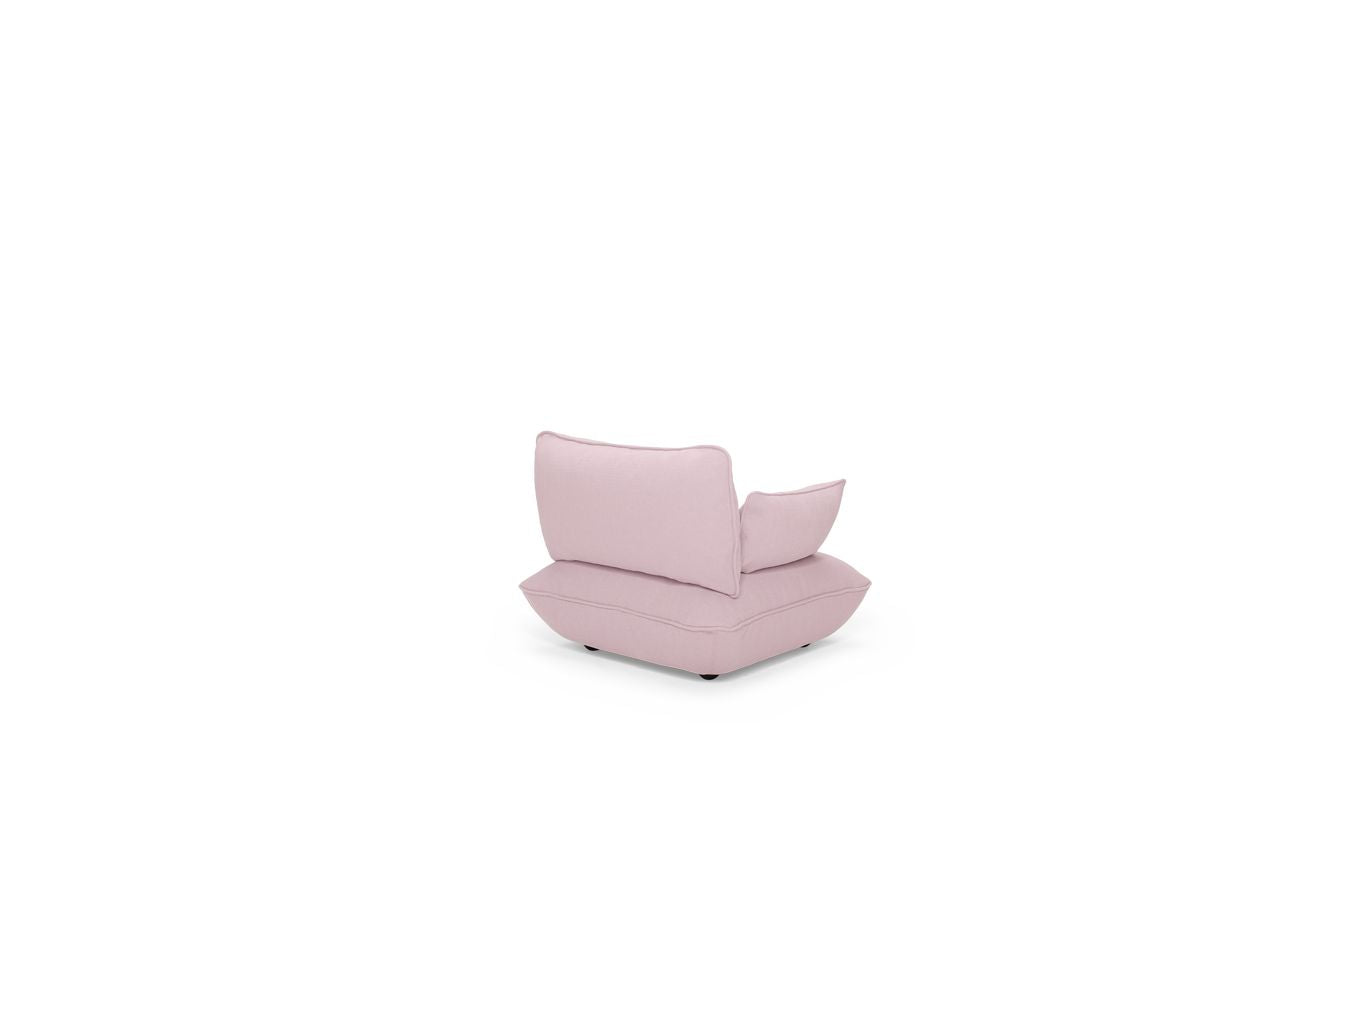 Fatboy Sumo Loveseat, Bubble Pink